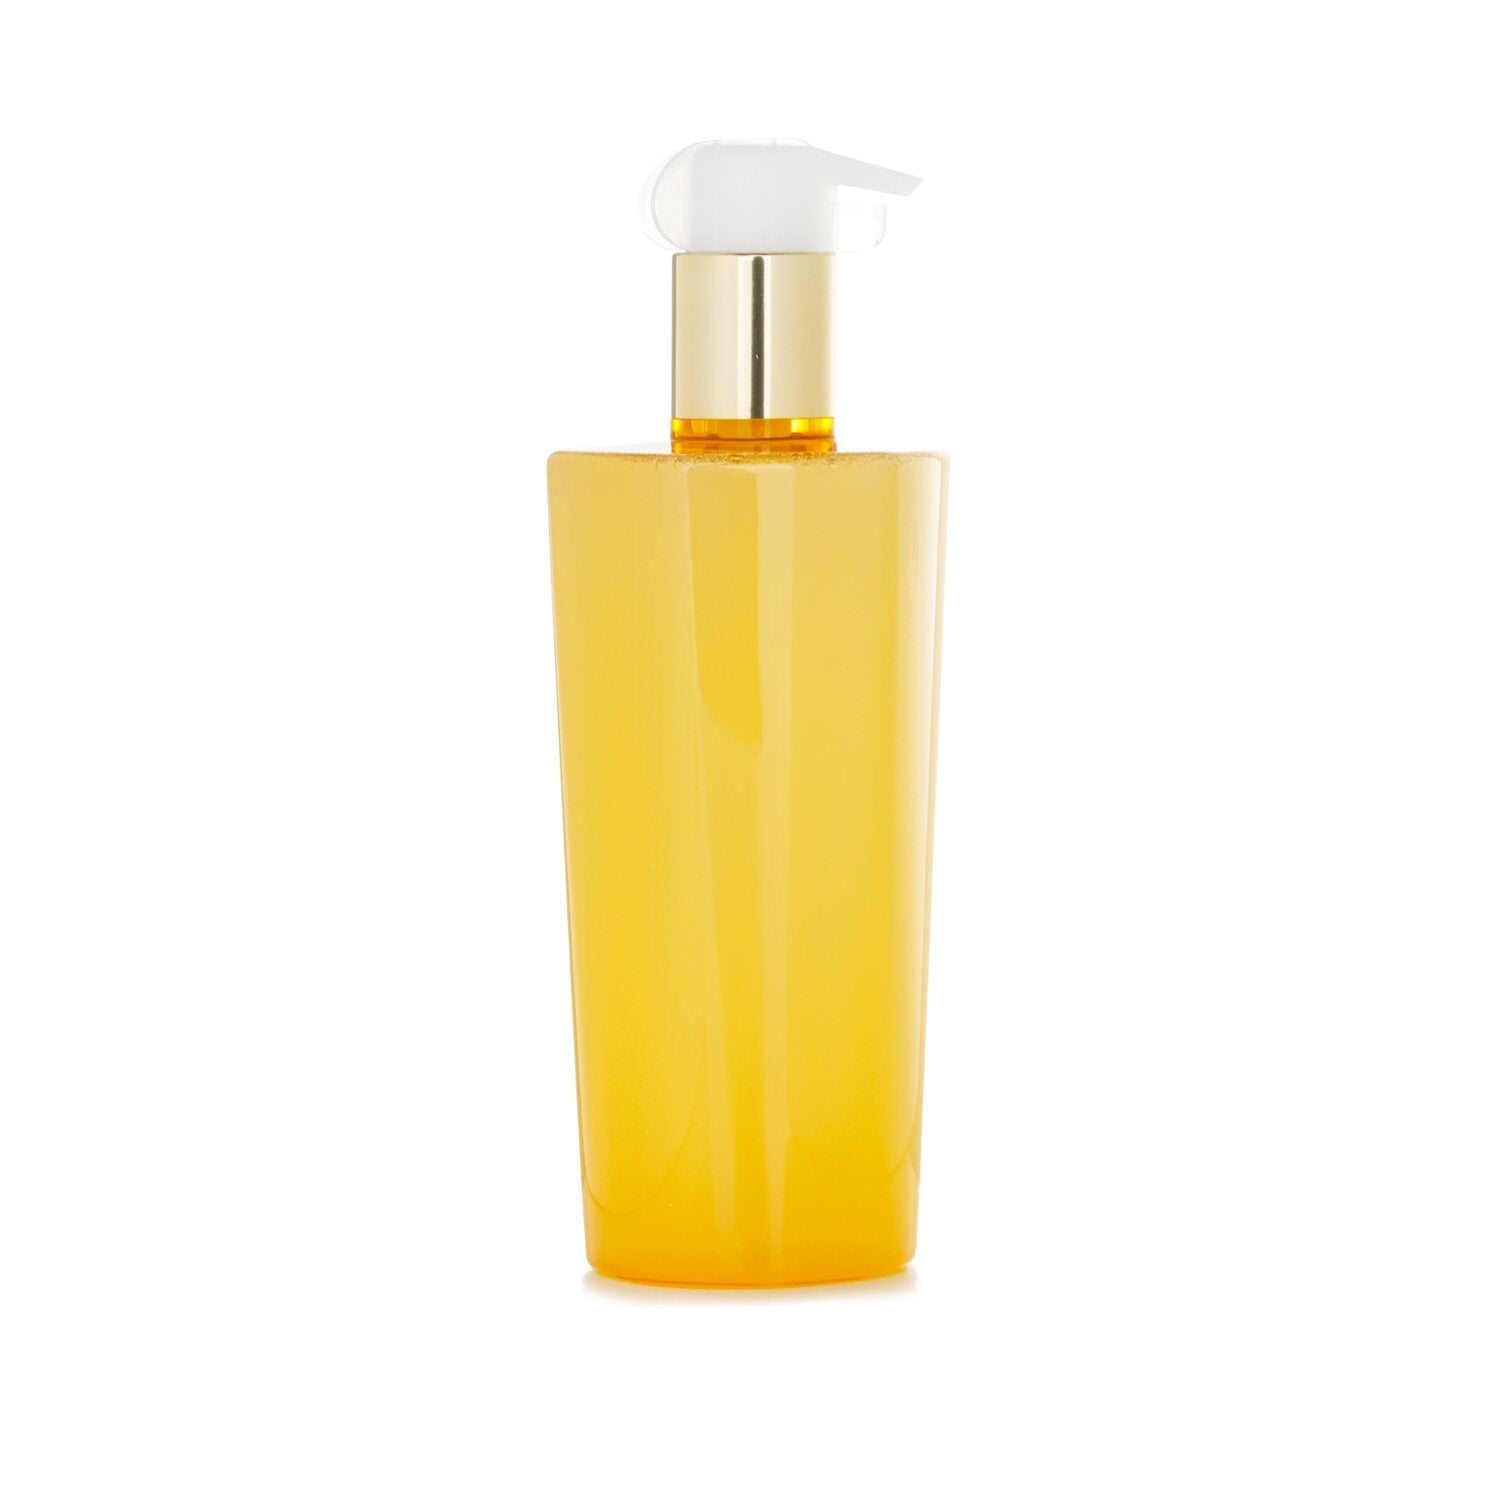 GUERLAIN - Abeille Royale Fortifying Lotion With Royal Jelly 615892 300ml/10.1oz 3P's Inclusive Beauty